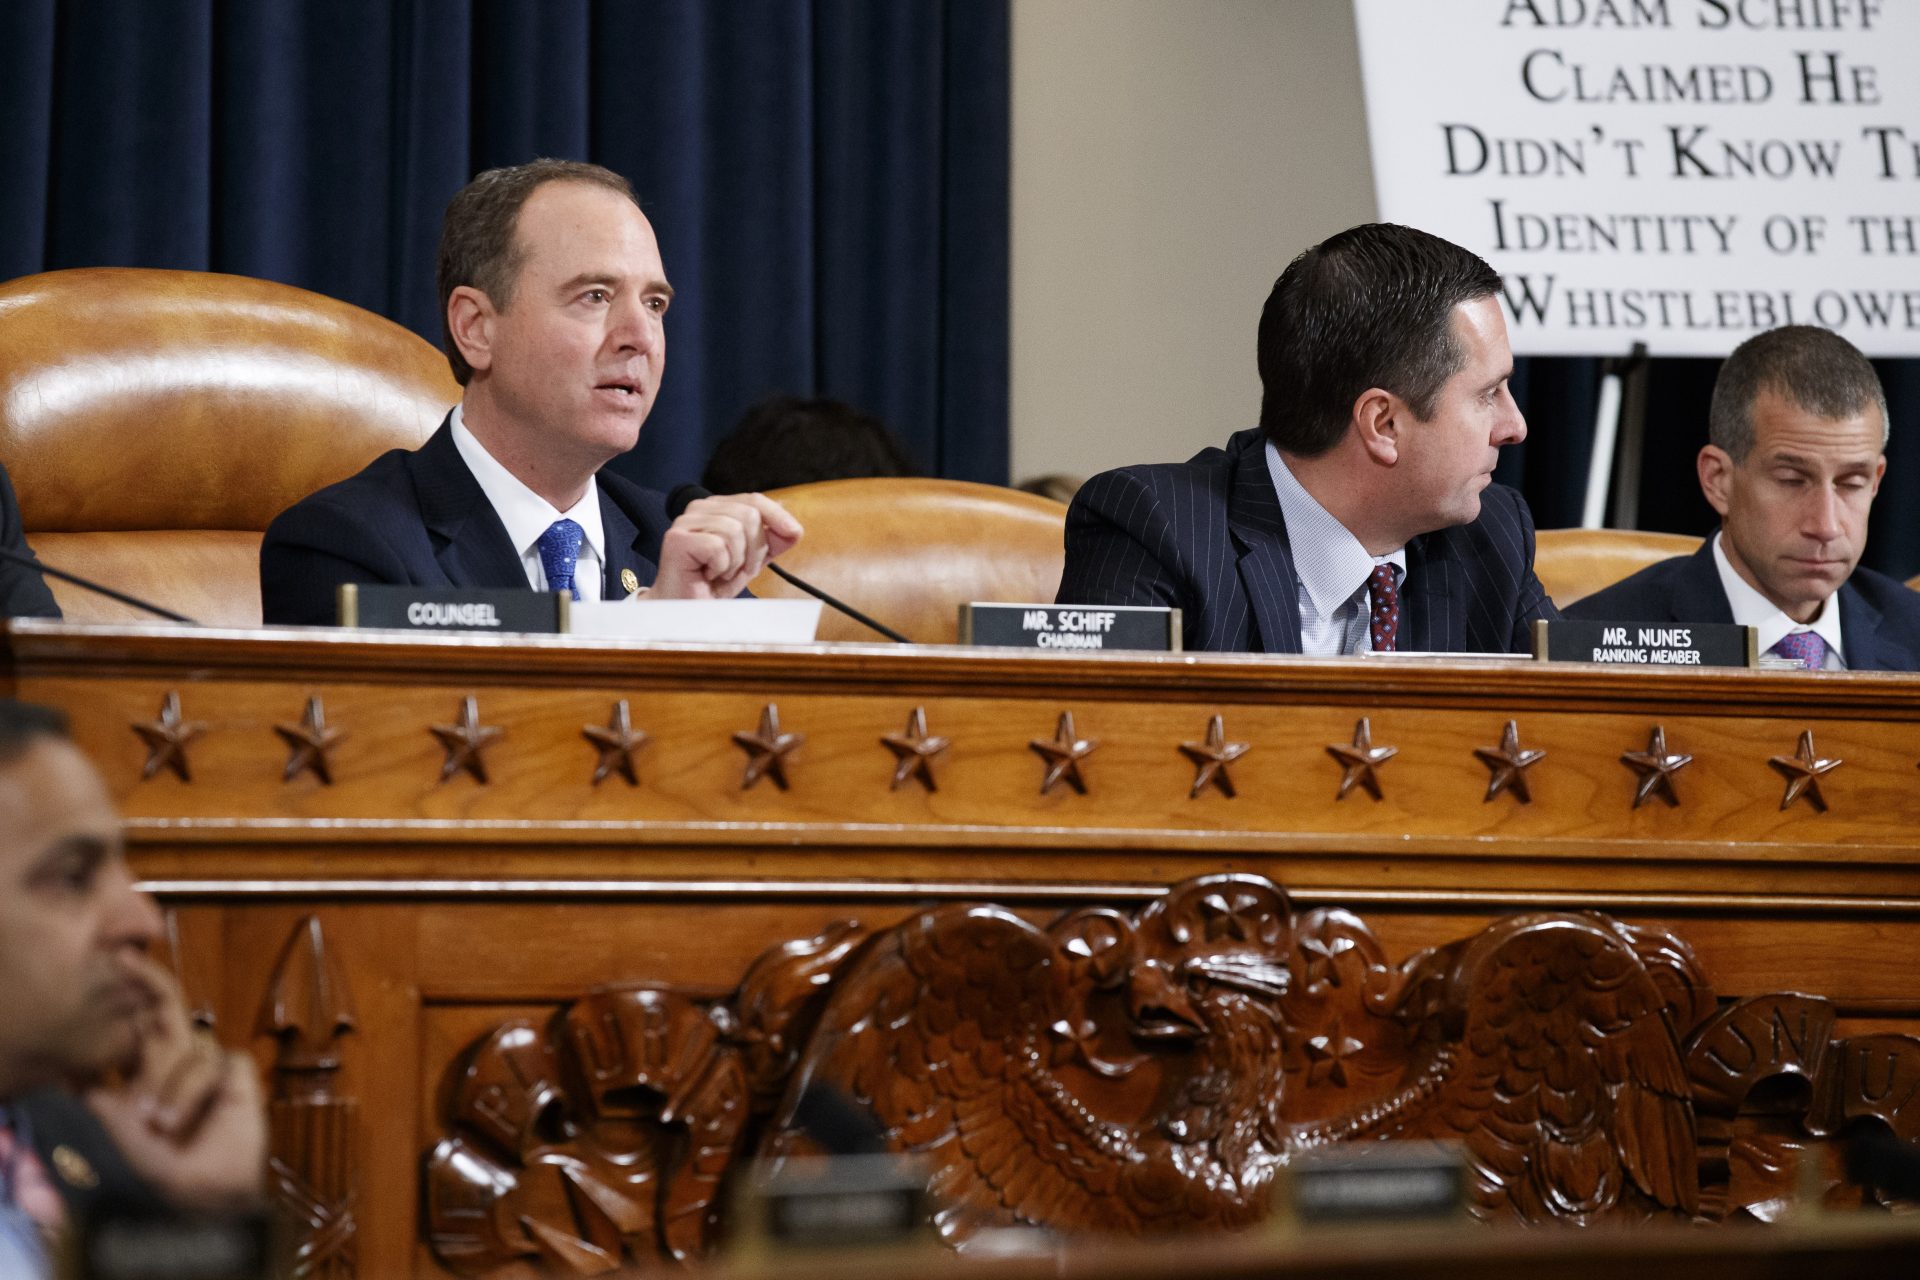 House Intelligence Committee Chairman Adam Schiff, D-Calif., left, gives his closing remarks as U.S. Ambassador to the European Union Gordon Sondland testifies before the House Intelligence Committee on Capitol Hill in Washington, Wednesday, Nov. 20, 2019, during a public impeachment hearing of President Donald Trump's efforts to tie U.S. aid for Ukraine to investigations of his political opponents, as ranking member Rep. Devin Nunes of Calif., is at center.